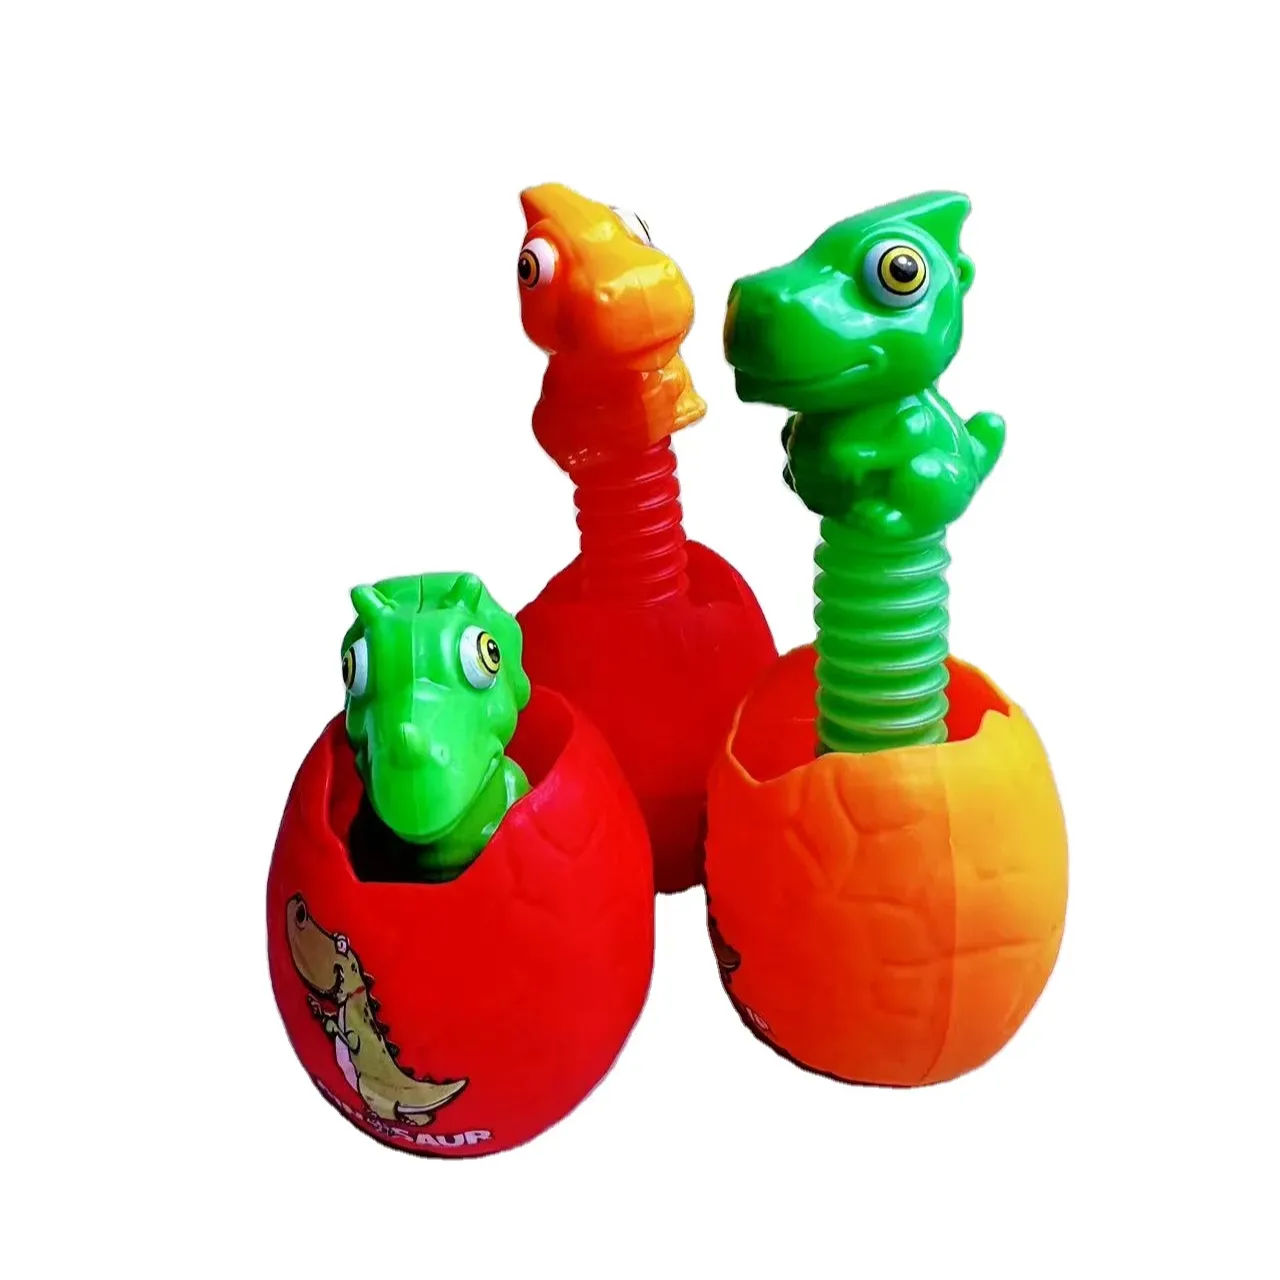 strange decompression variable telescopic shell-breaking dinosaur eggs retractable creative candy toy